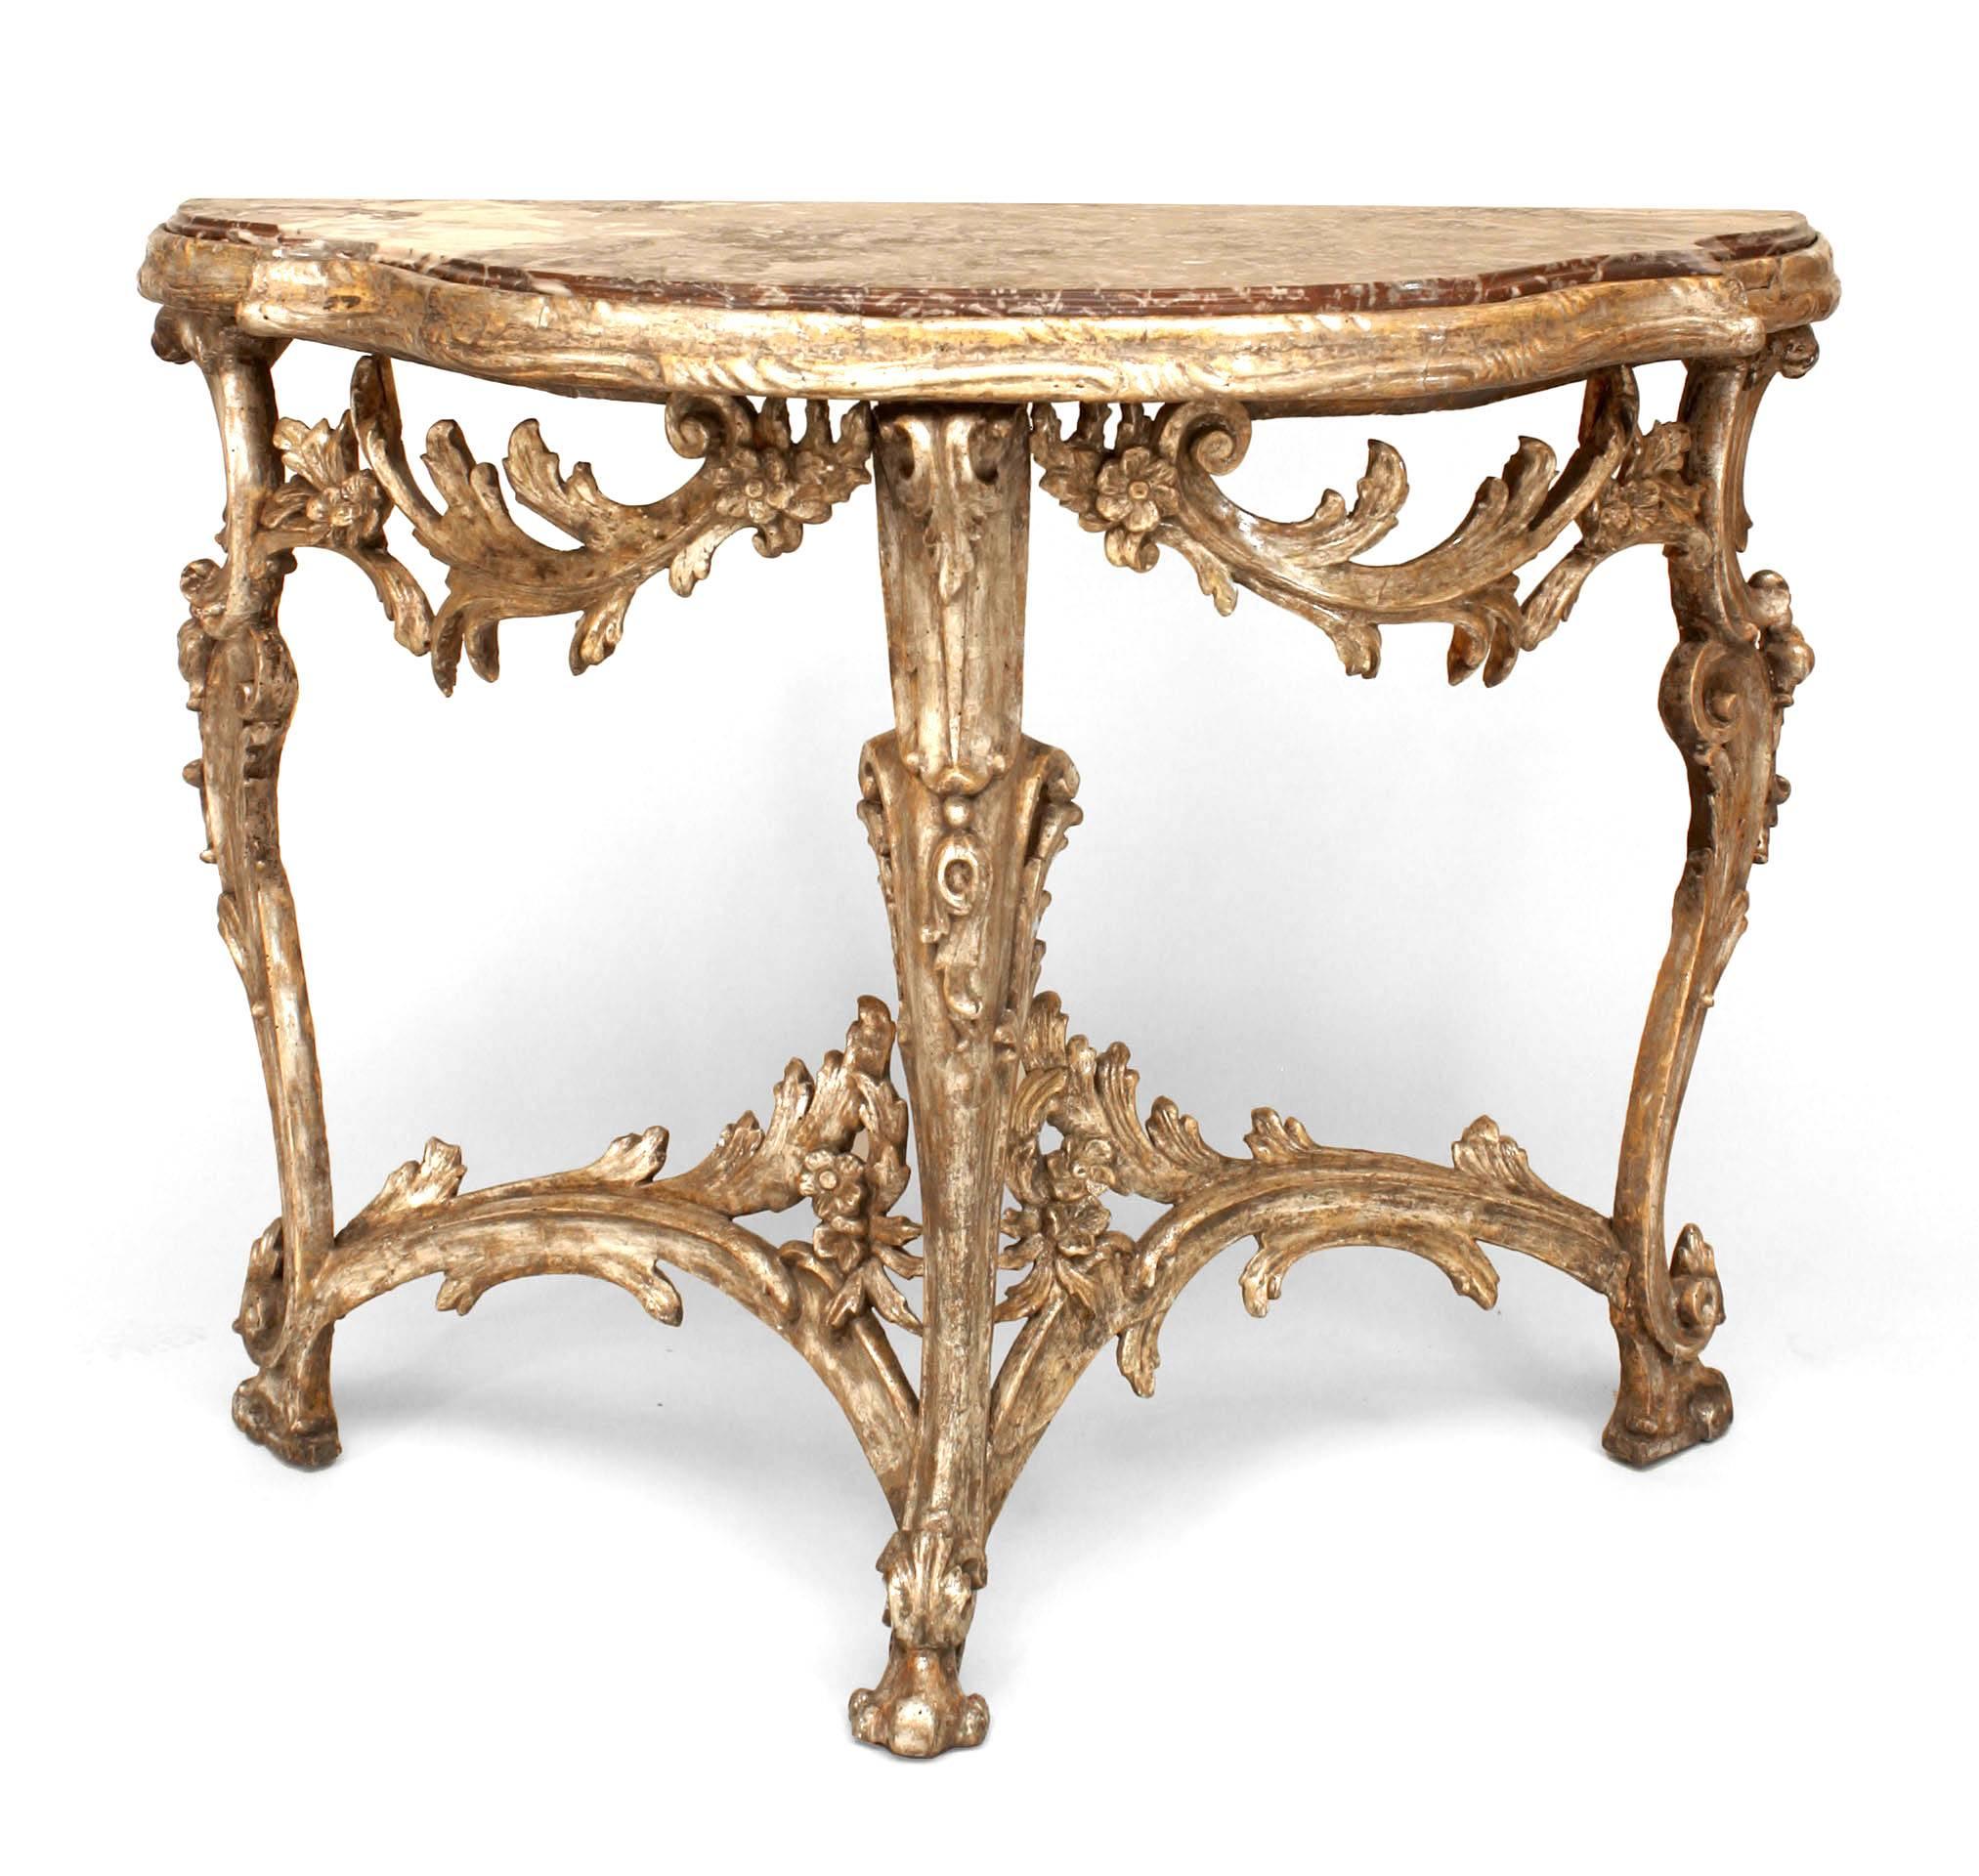 Italian Venetian (18th Century) gilt 3 leg console table with carved floral design stretcher & apron with shaped brown marble top.
